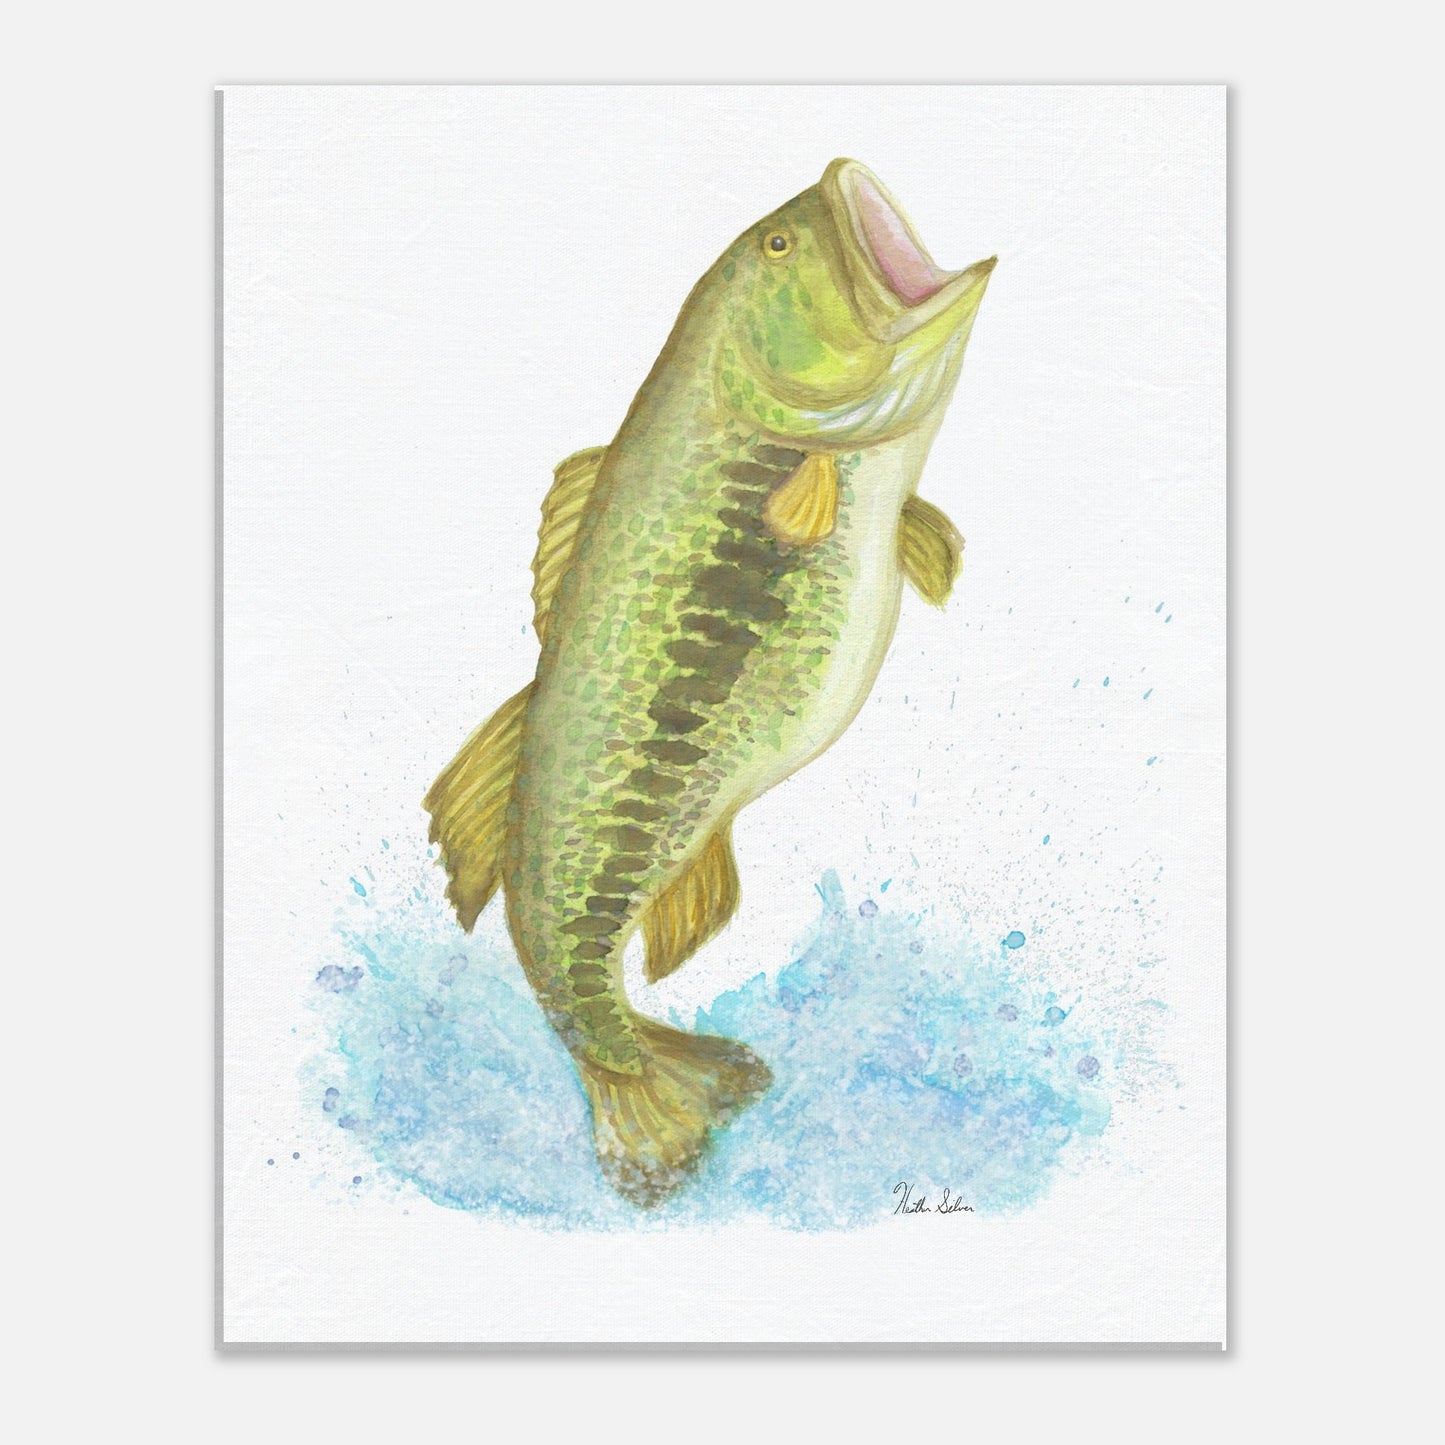 11 by 14 inch slim canvas wall art print featuring a watercolor painting of a largemouth bass leaping from the water. Hanging hardware included.